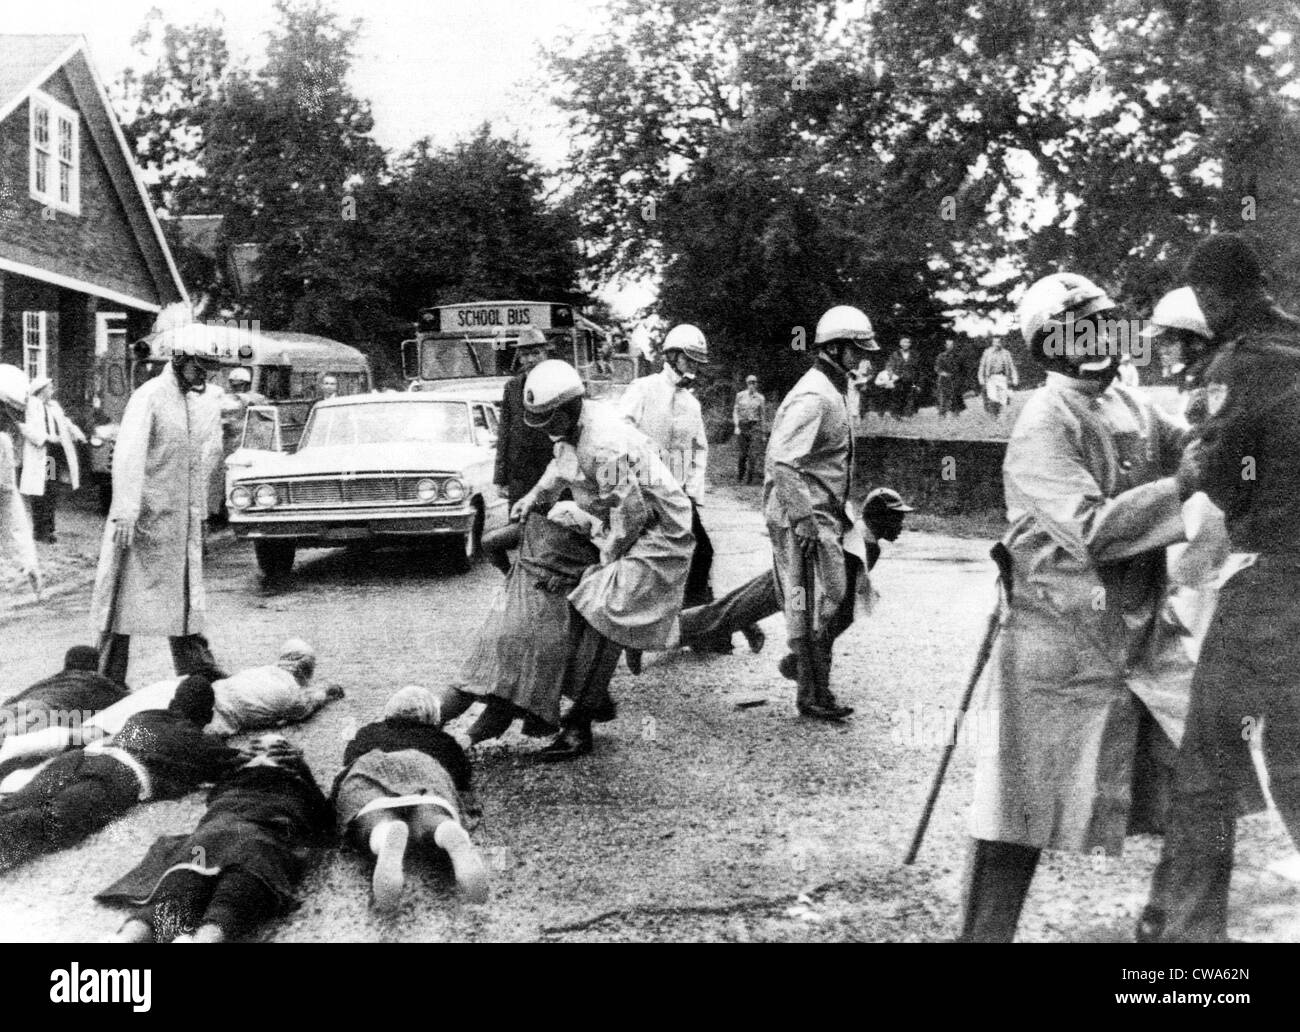 CIVIL RIGHTS, Crawfordville, Georgia, Black demonstrators block school buses carrying white students after the protestors were Stock Photo